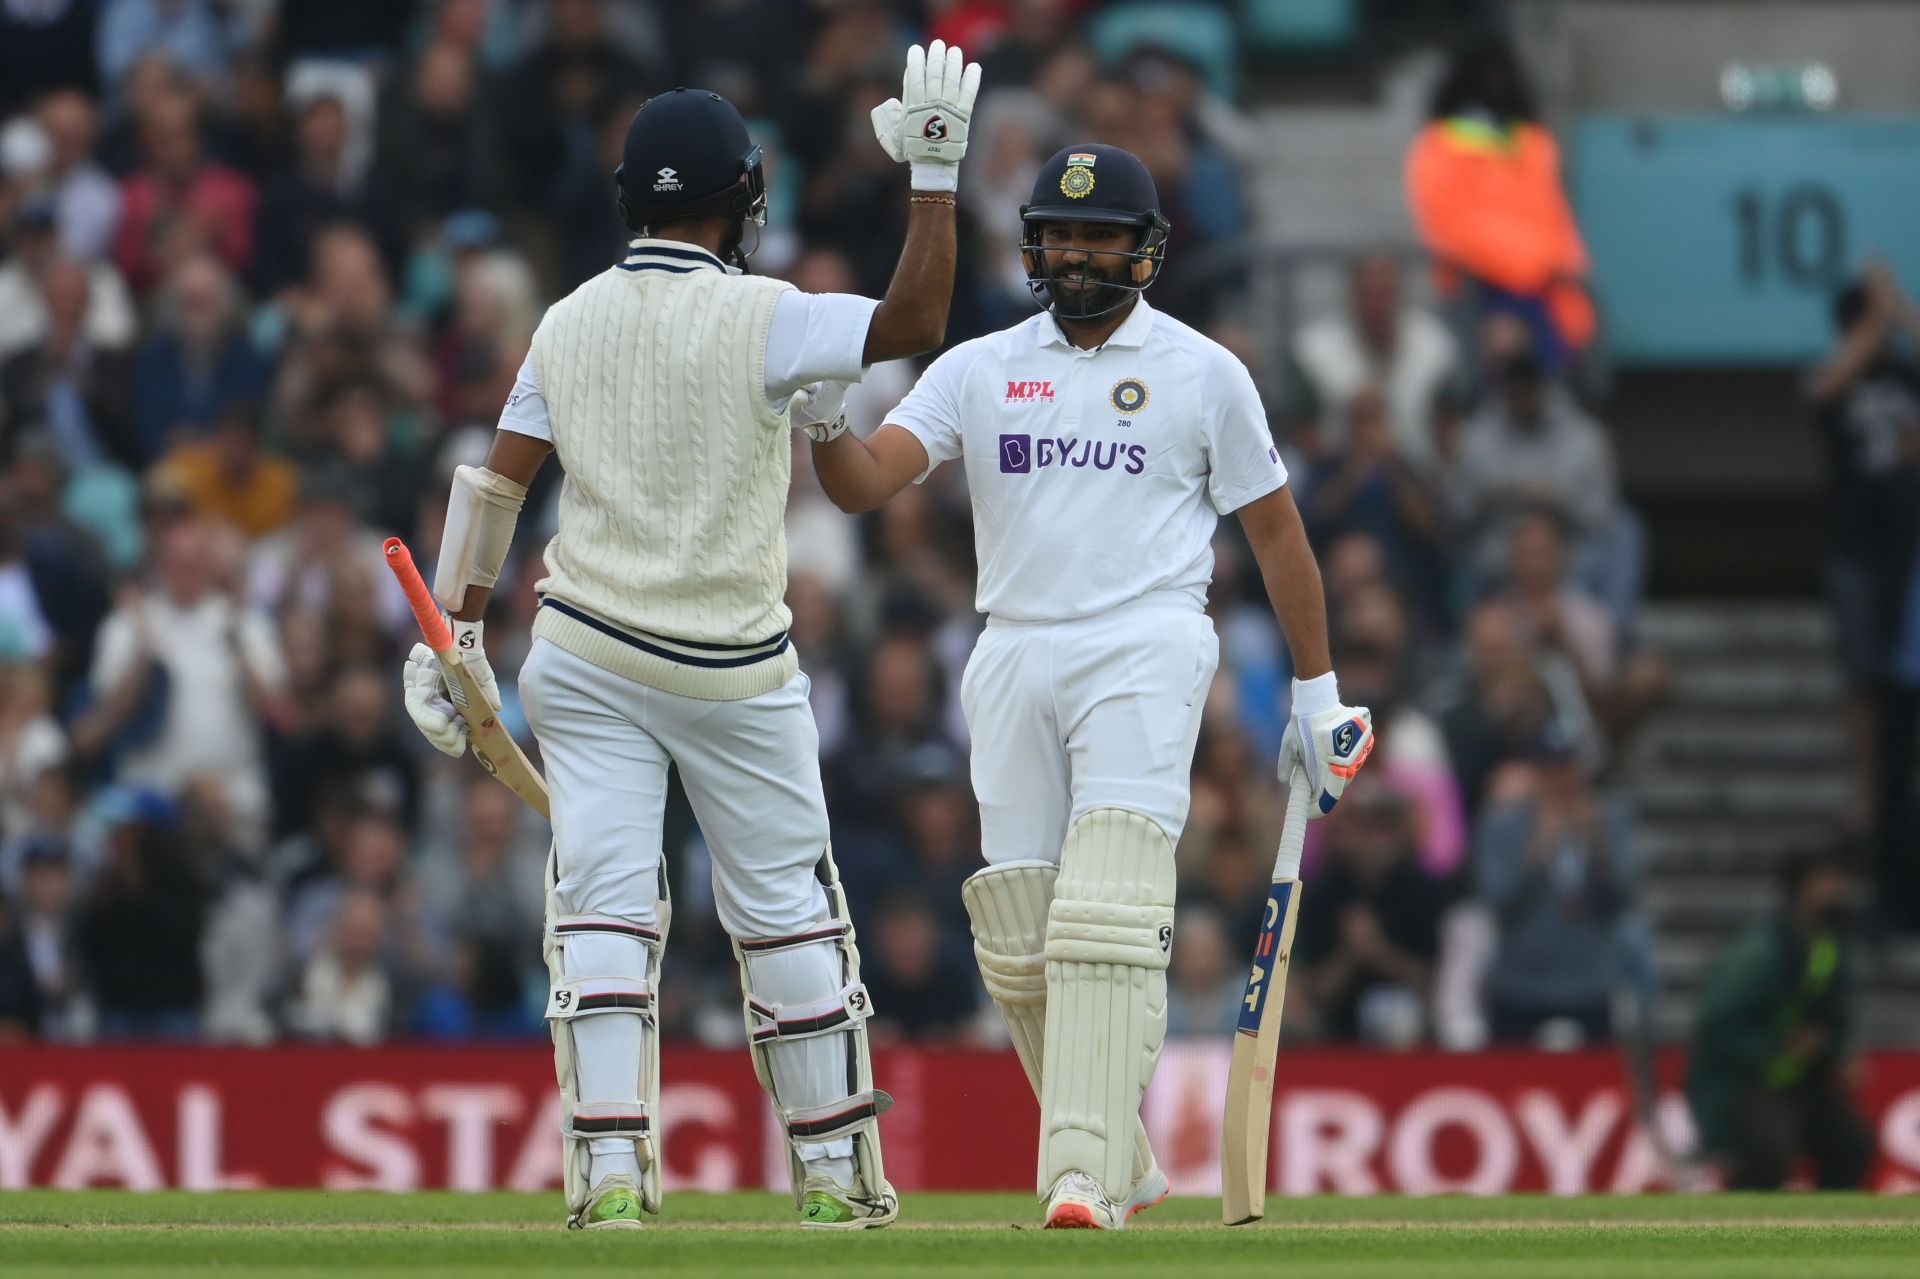 Rohit notched up his first overseas hundred at the Oval